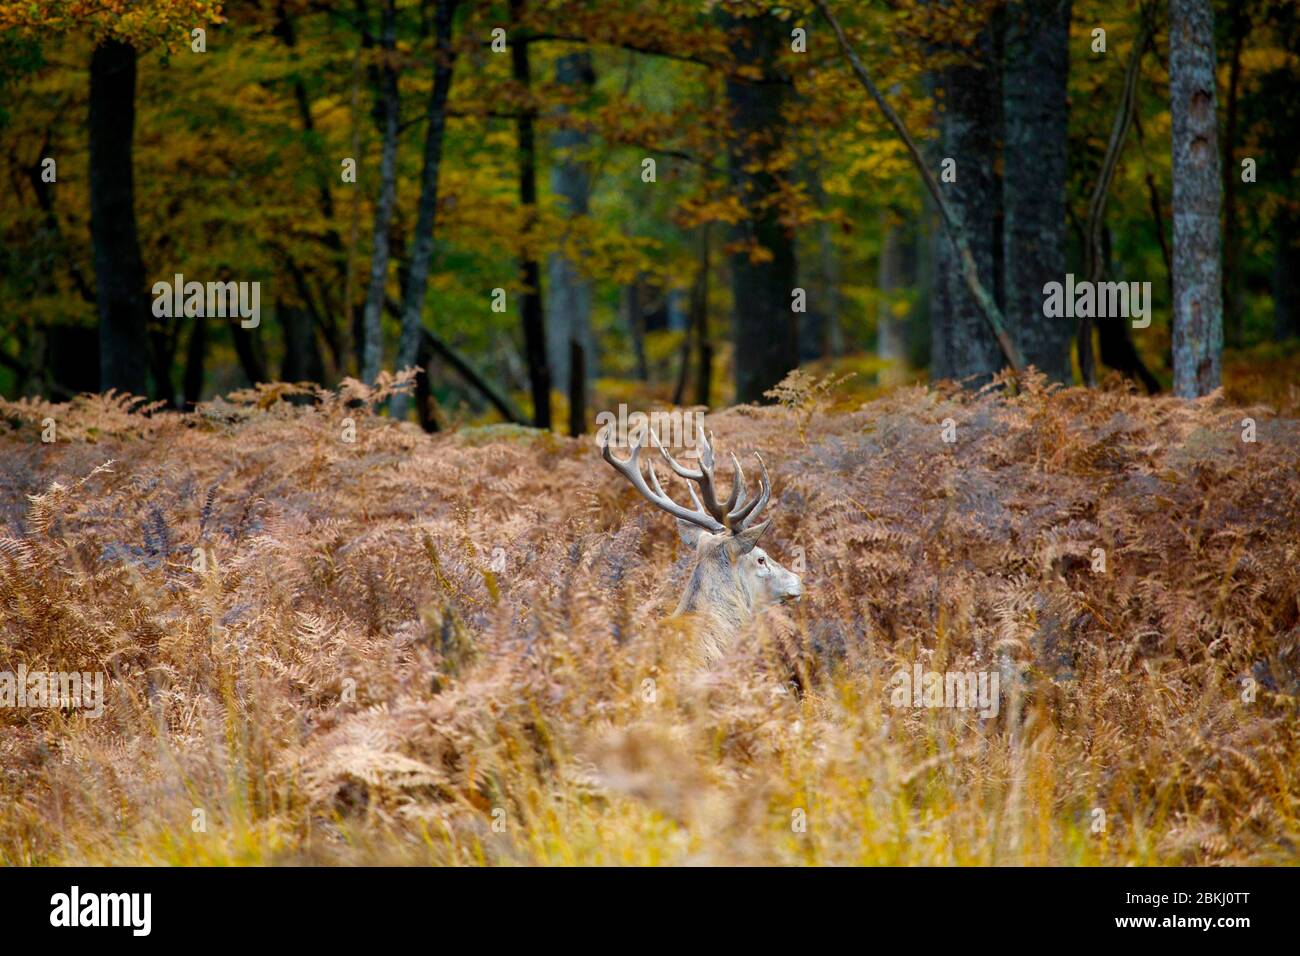 France, Sologne, a deer in the forest Stock Photo